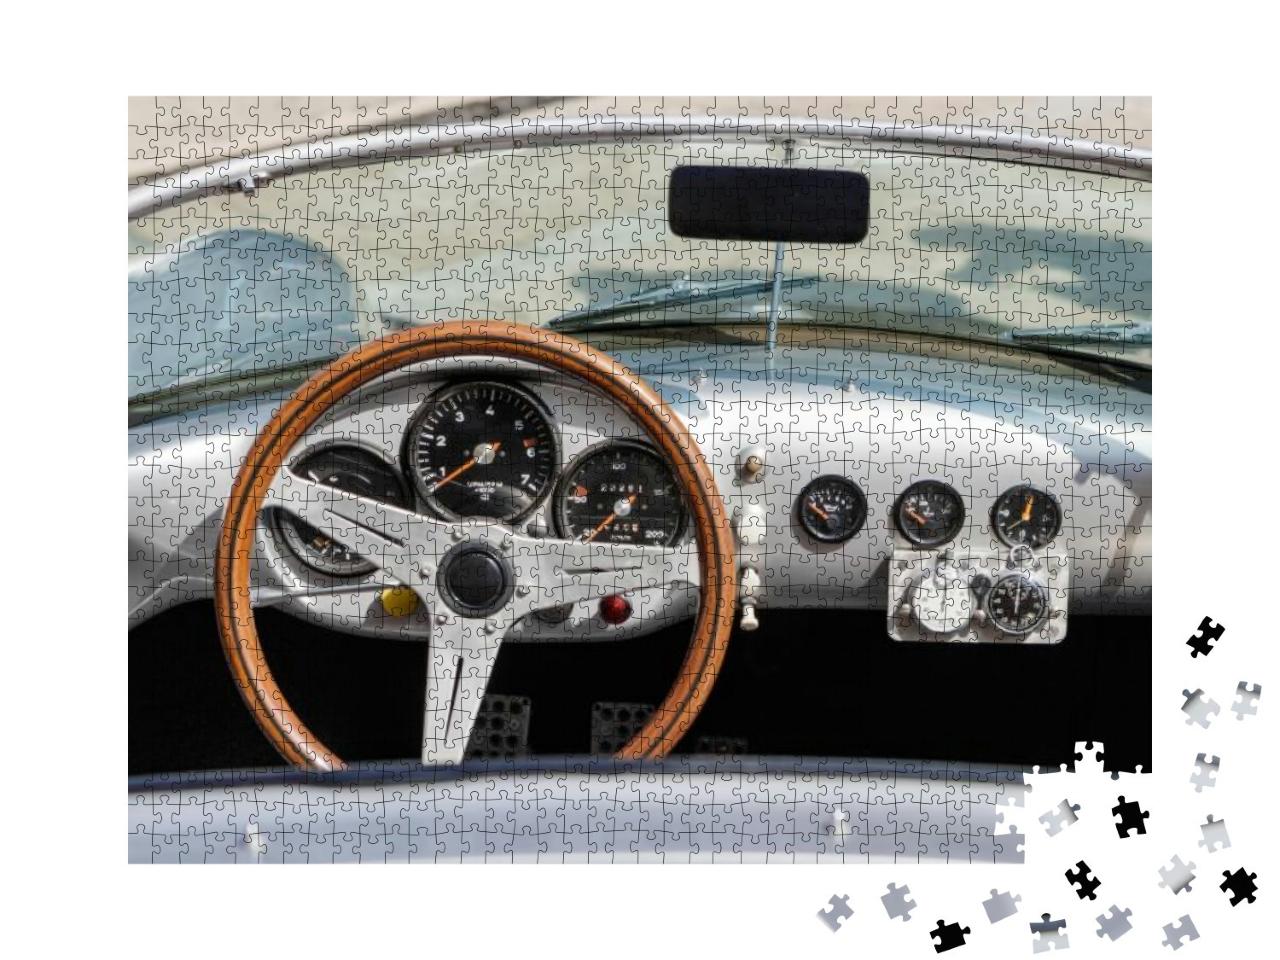 Detailed Photo of the Interior Dashboard, Steering Wheel... Jigsaw Puzzle with 1000 pieces